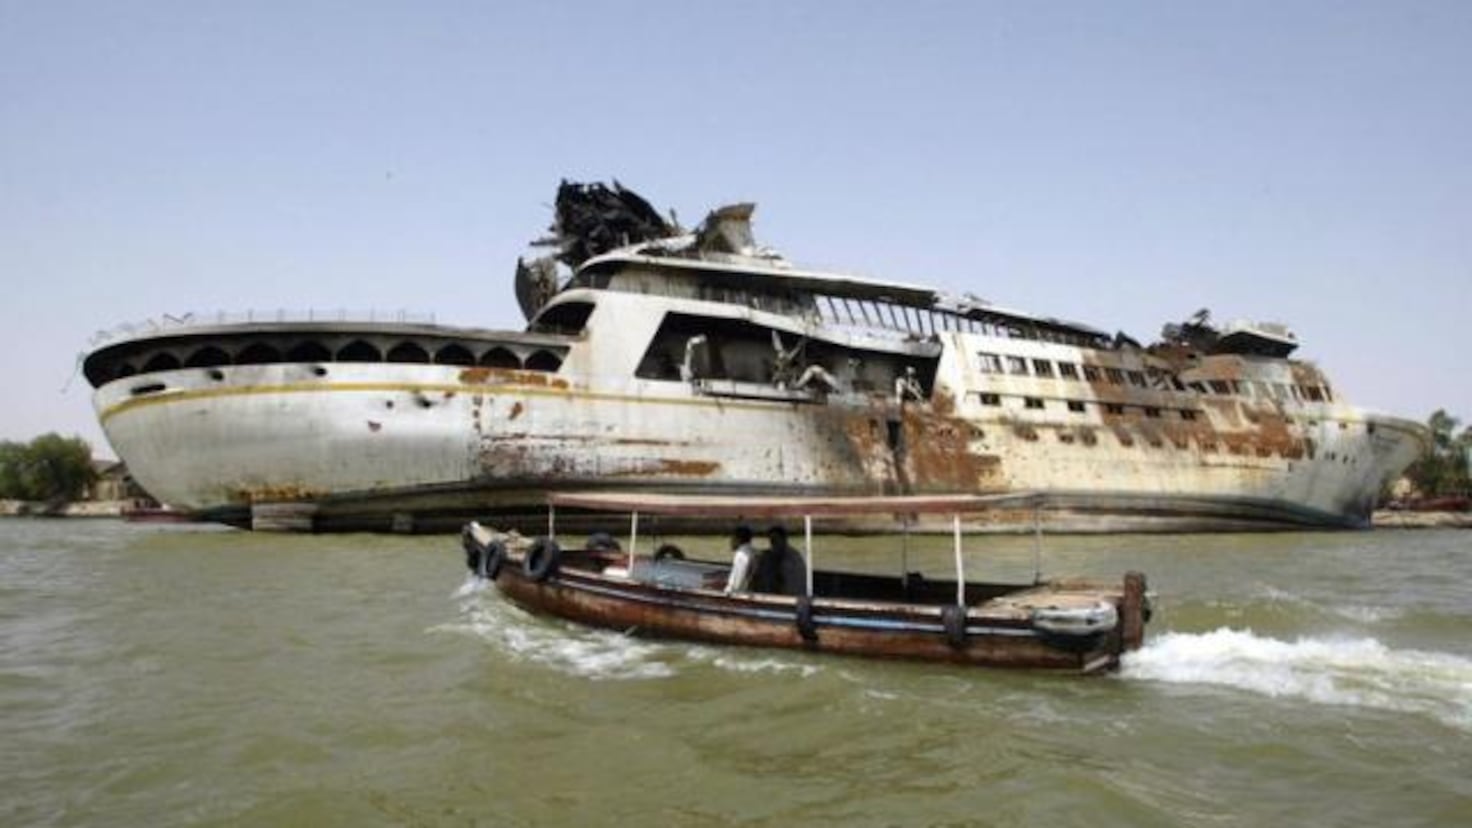 Saddam Hussein's luxury yacht is now a tourist attraction junk pile
